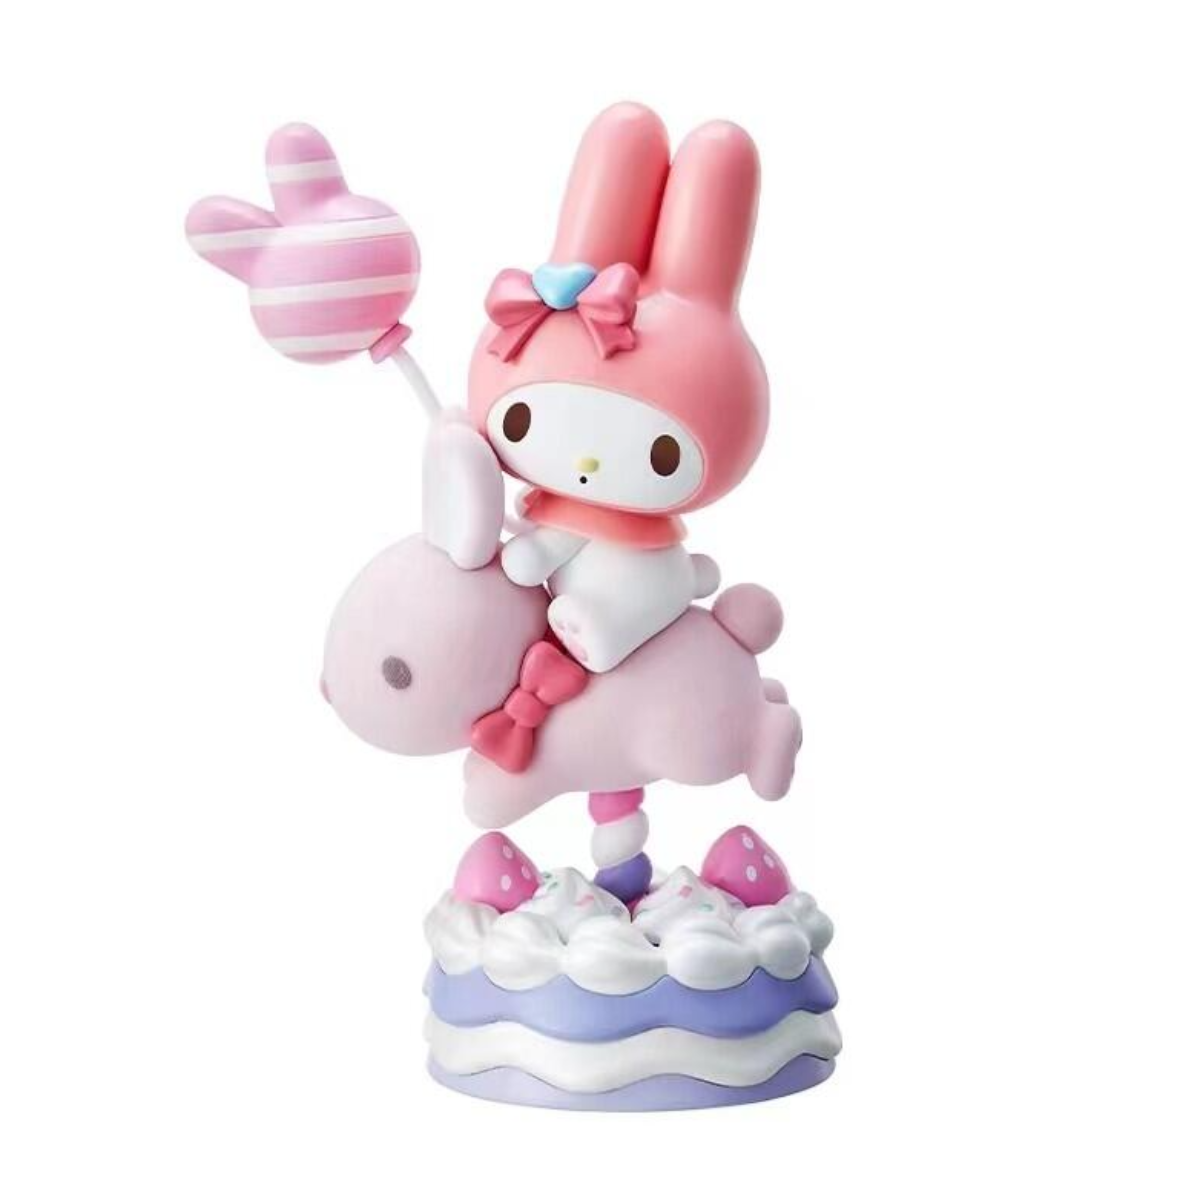 Miniso x Sanrio Characters Sweet Party Series-My Melody-Miniso-Ace Cards & Collectibles